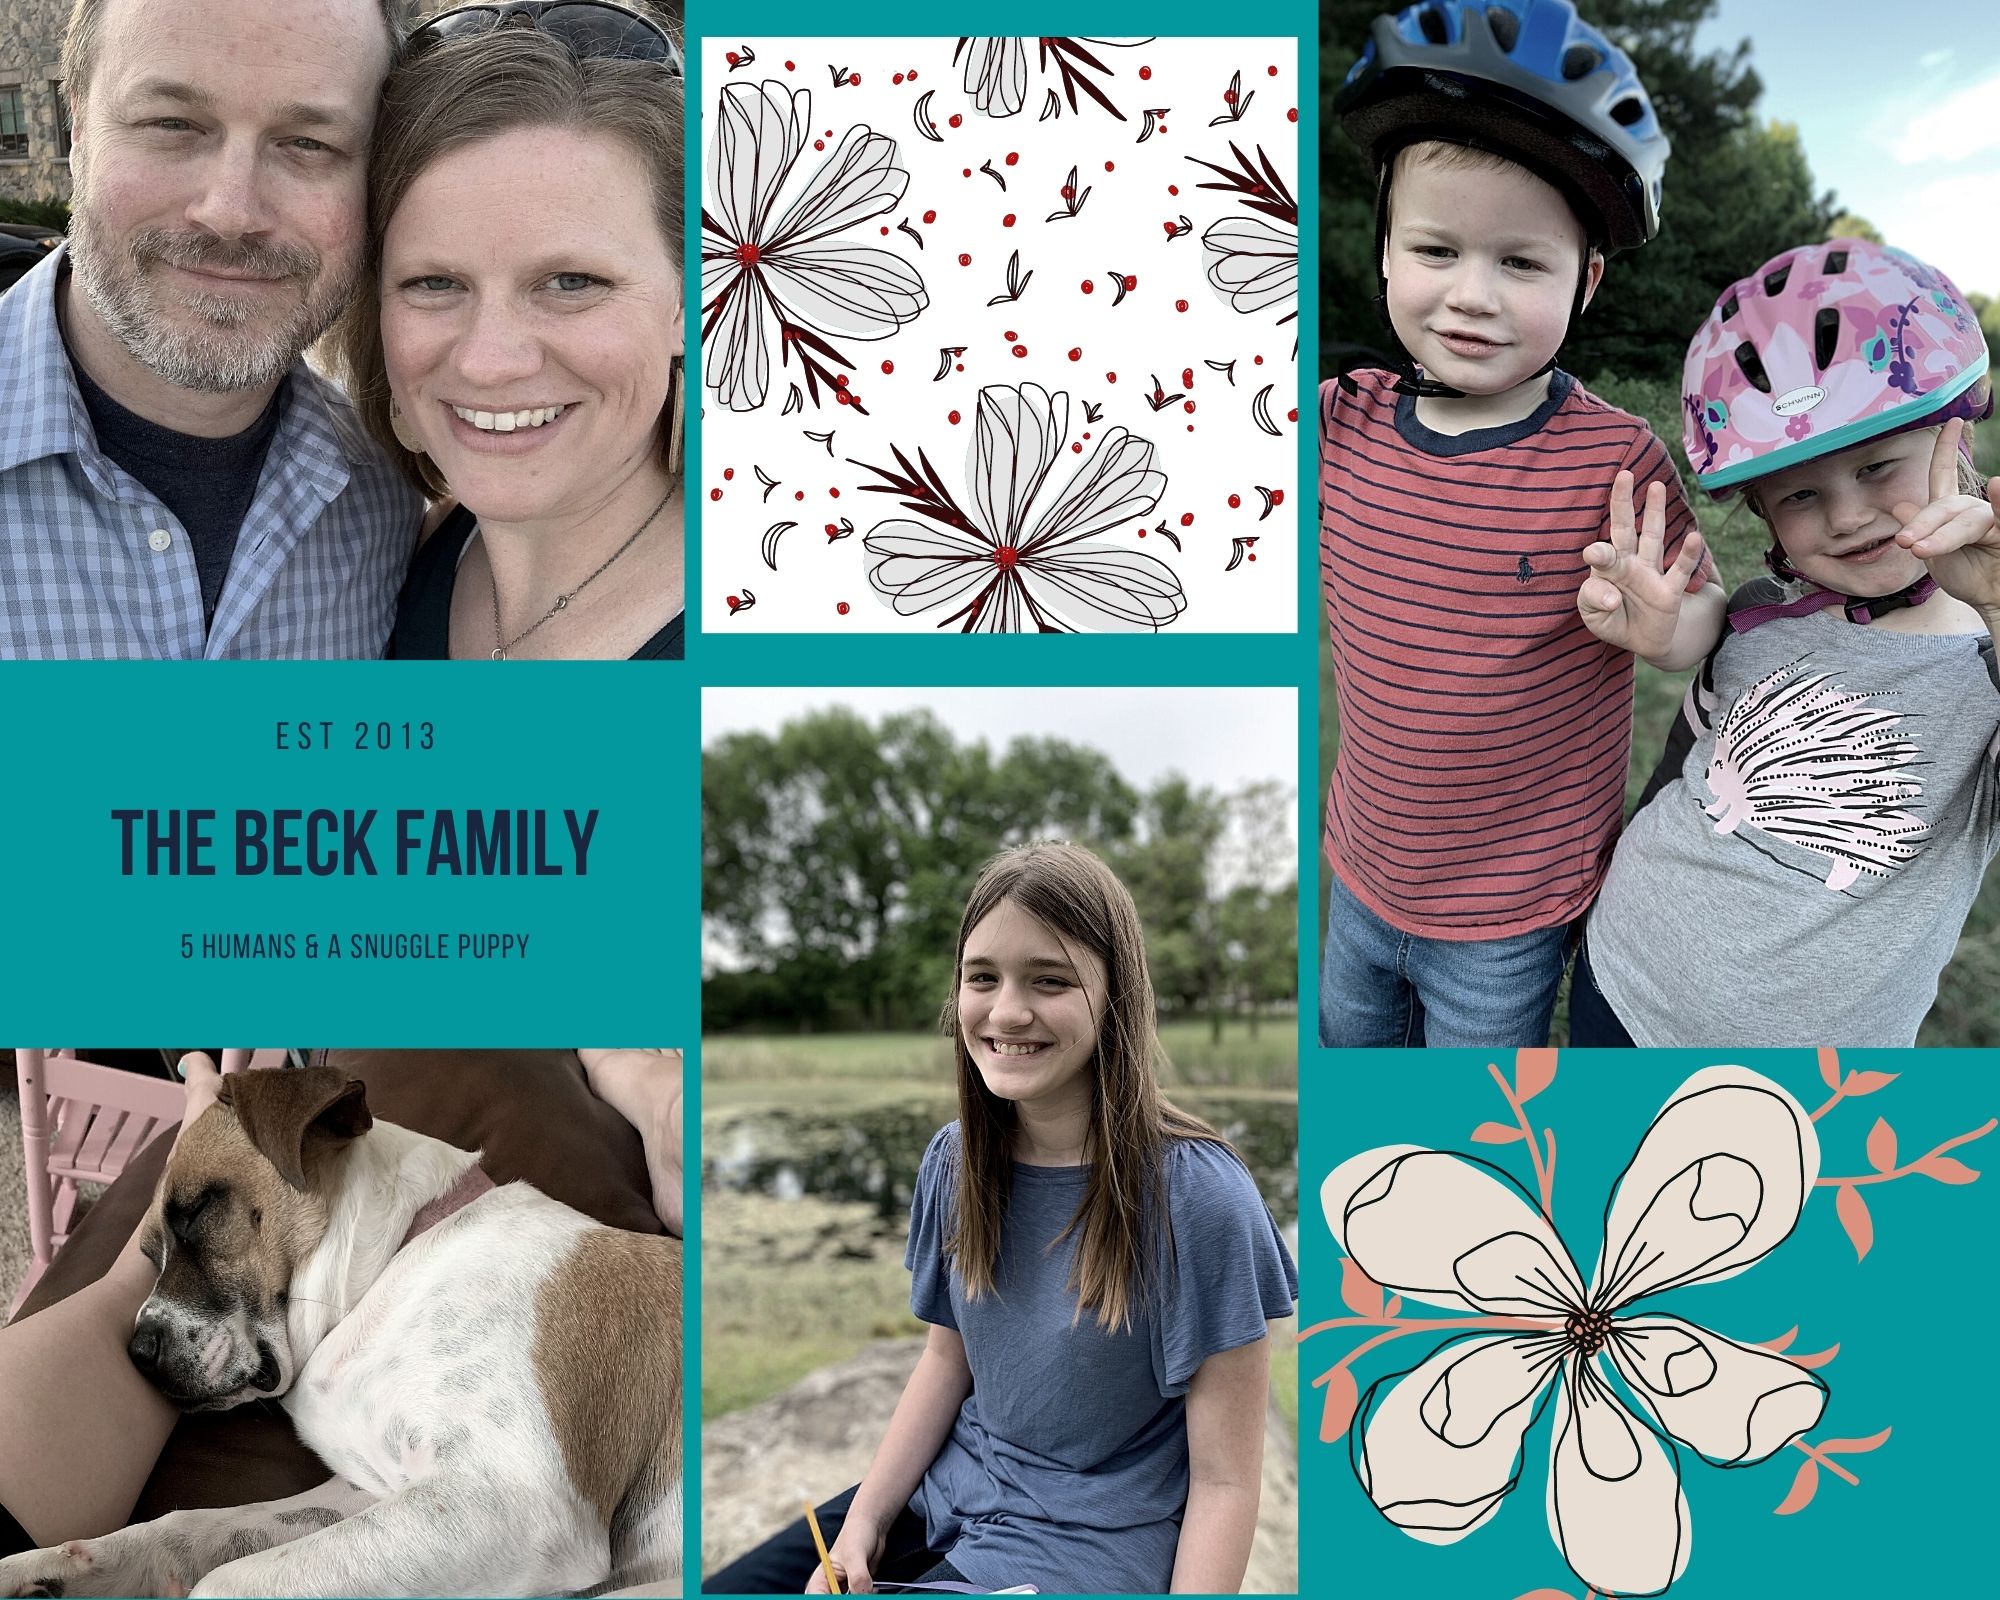 The Beck Family